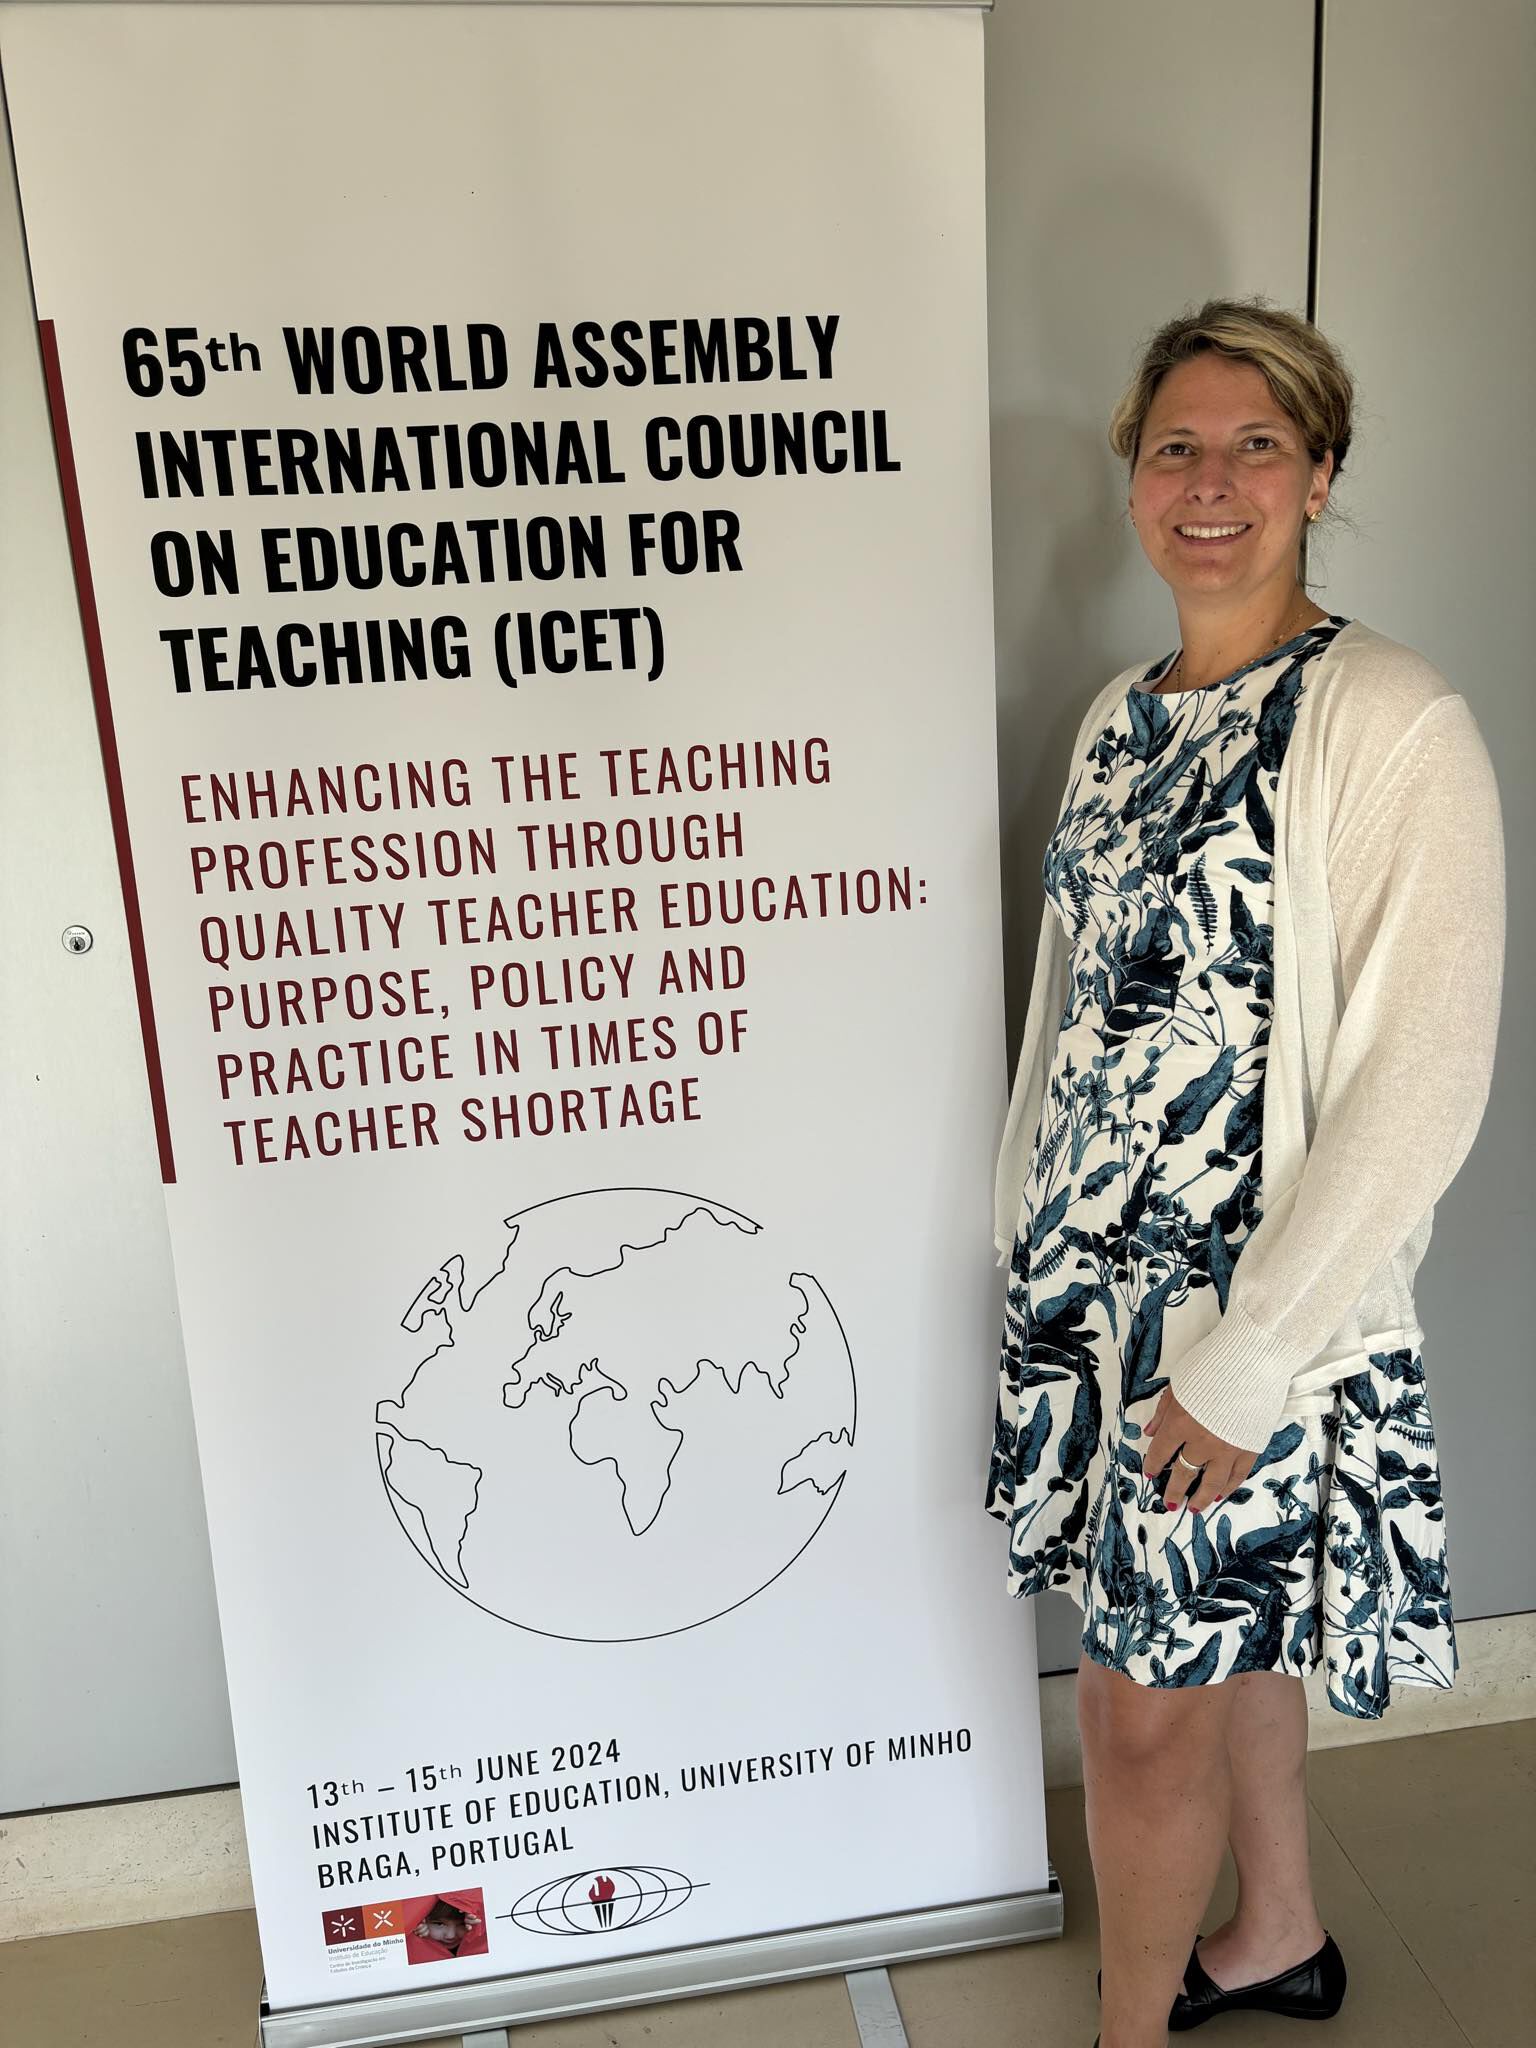 Ilka Nagel in front of a poster for the ICET conference.